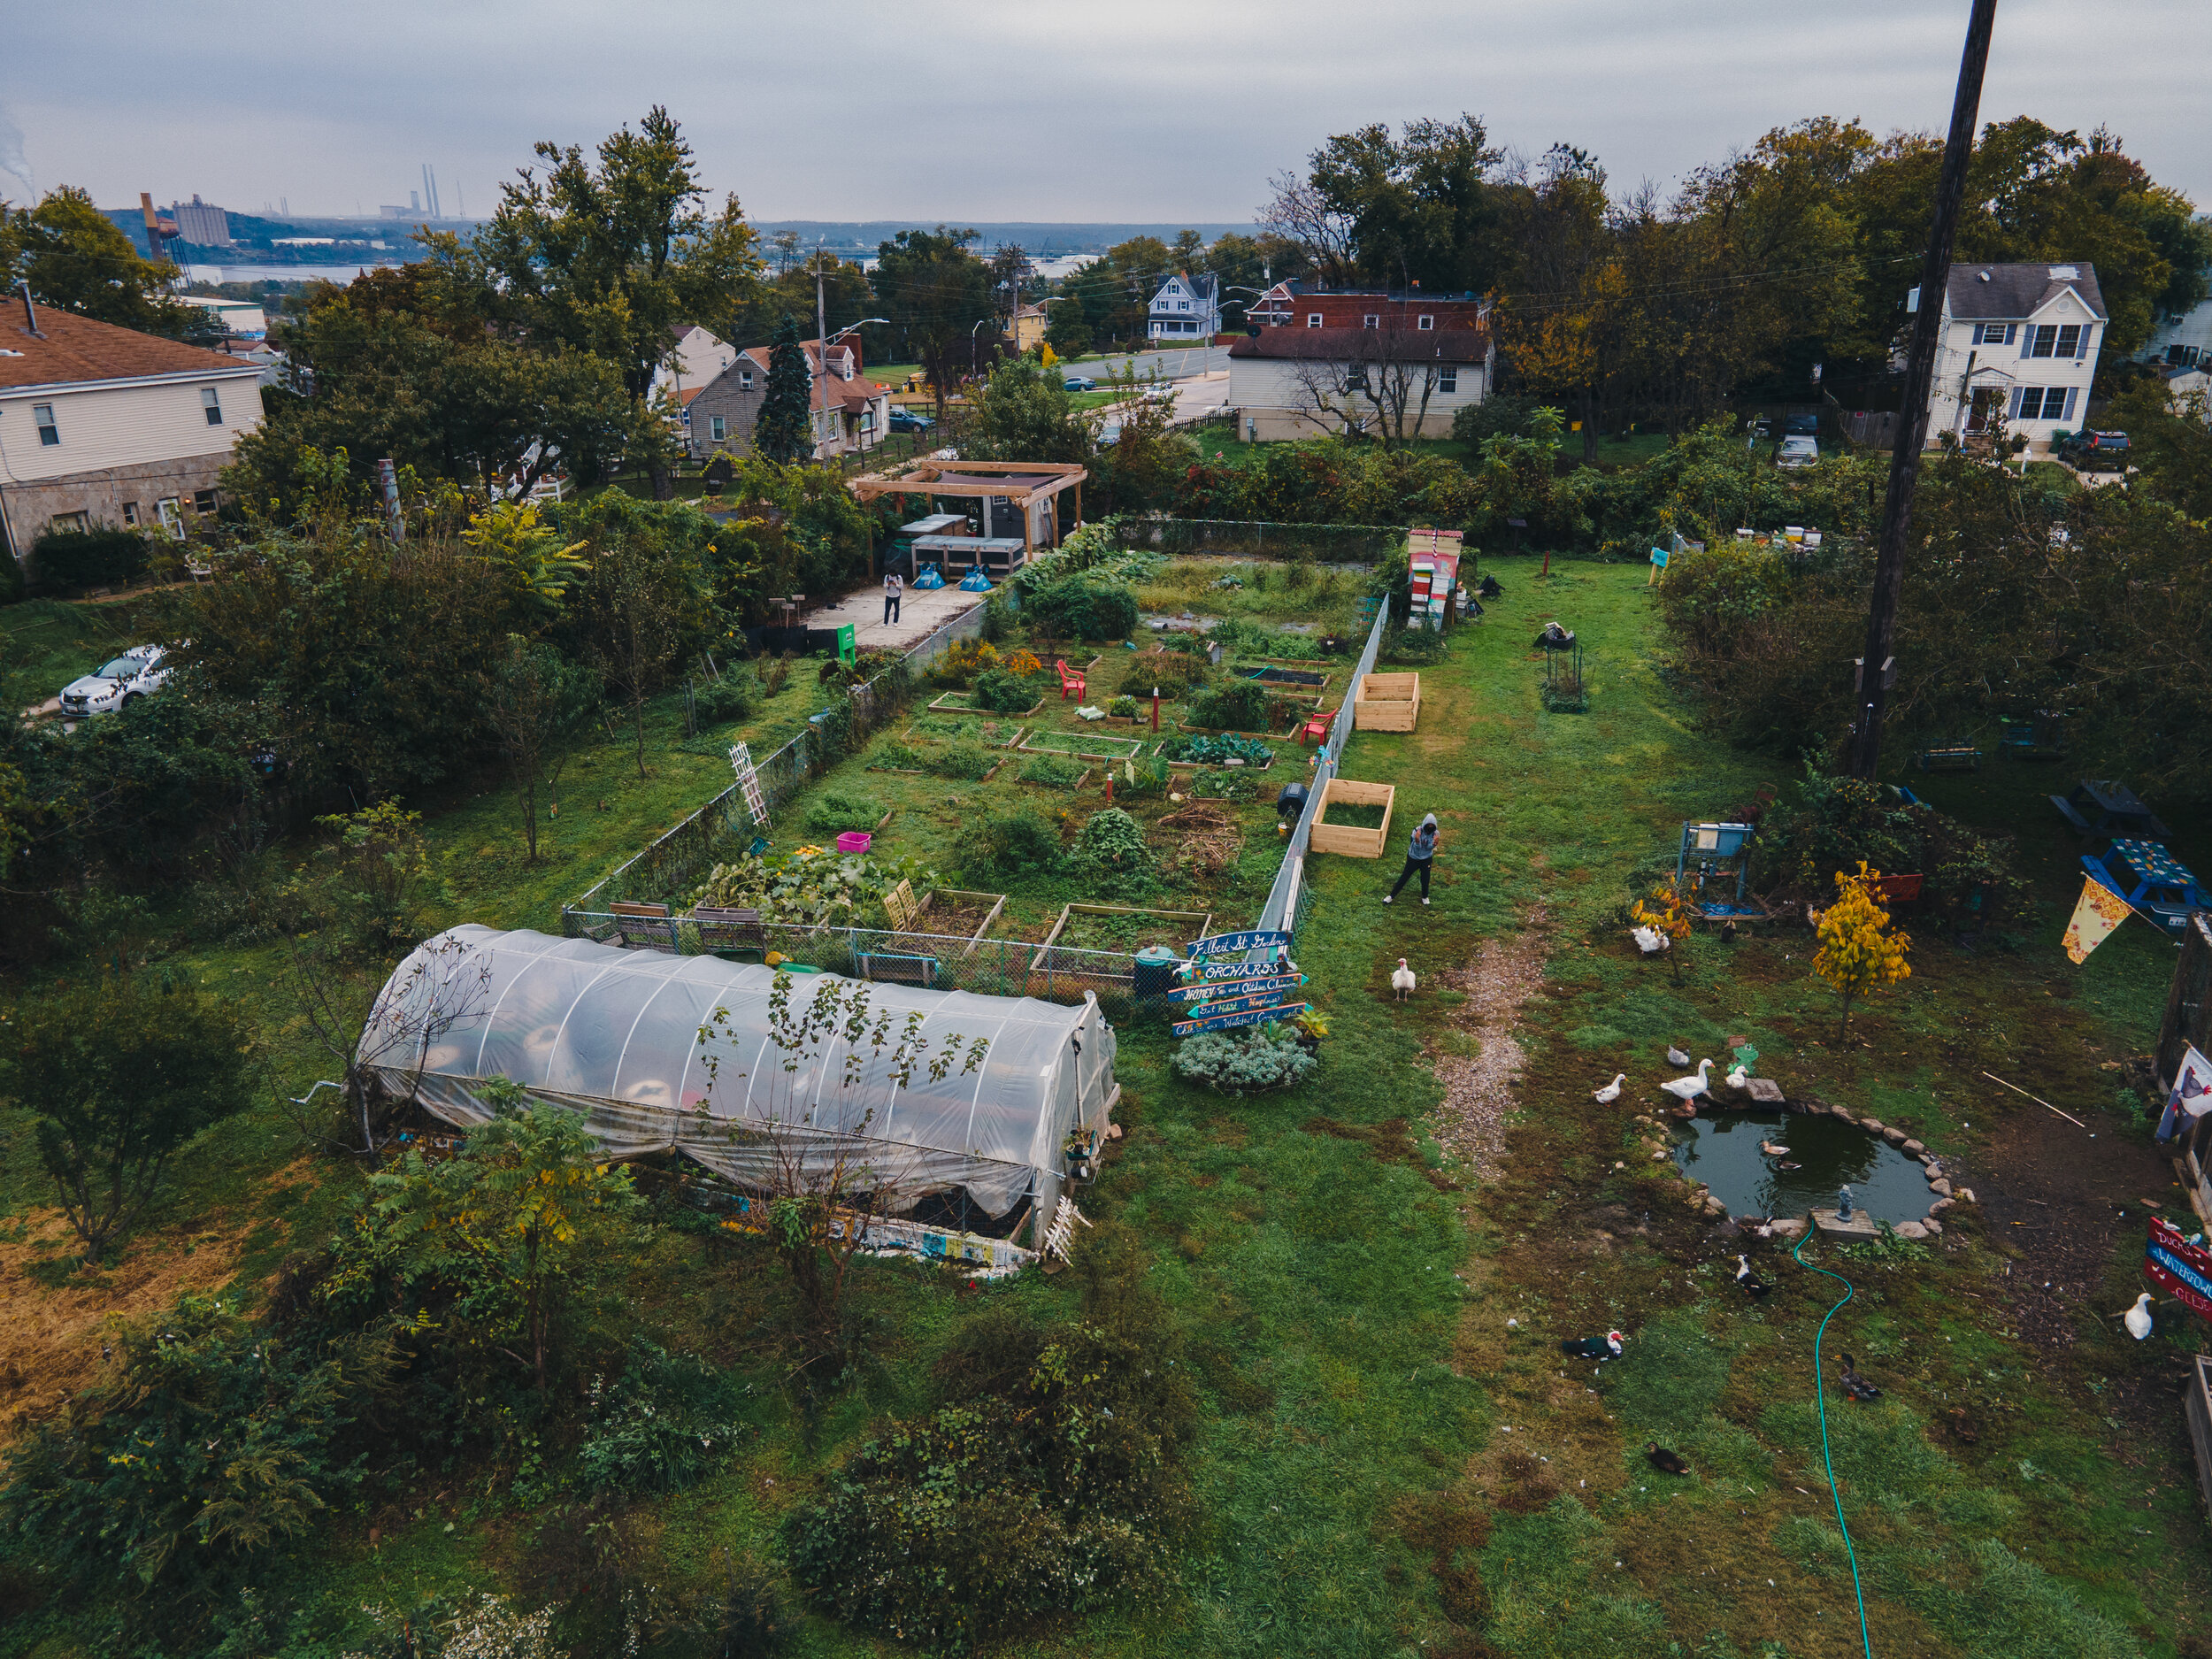  containing a variety of crops, livestock, beehives, and a small composting facility, the Filbert St. Gardens serve as a holistic community healing center where families can get organic produce in a food desert, gain access to an urban green space, a